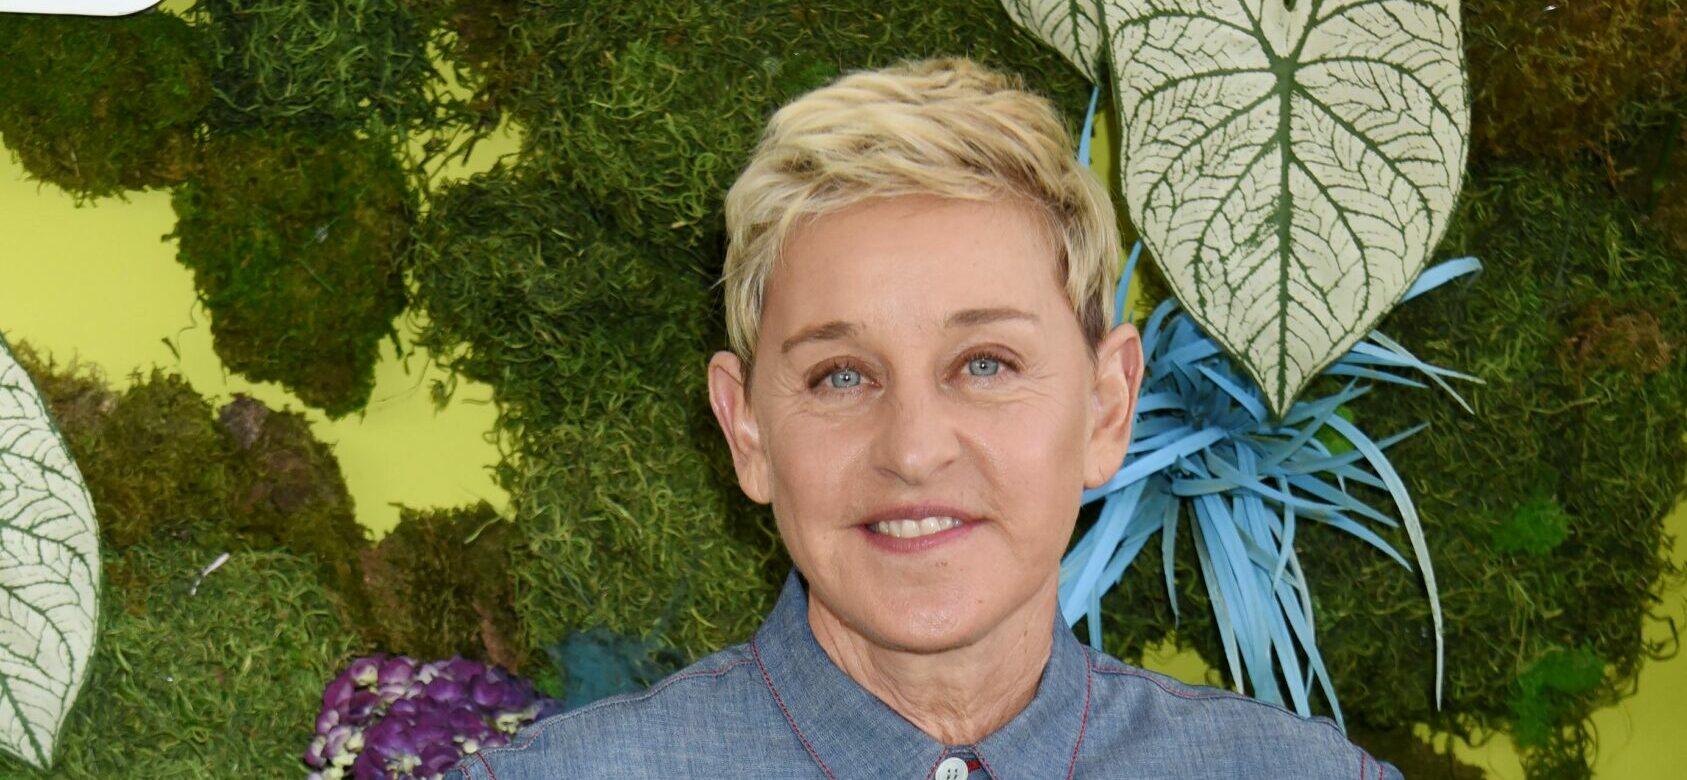 Ellen DeGeneres Admits ‘Past 11 Days Have Been Really Tough’ Following ‘tWitch’s’ Death